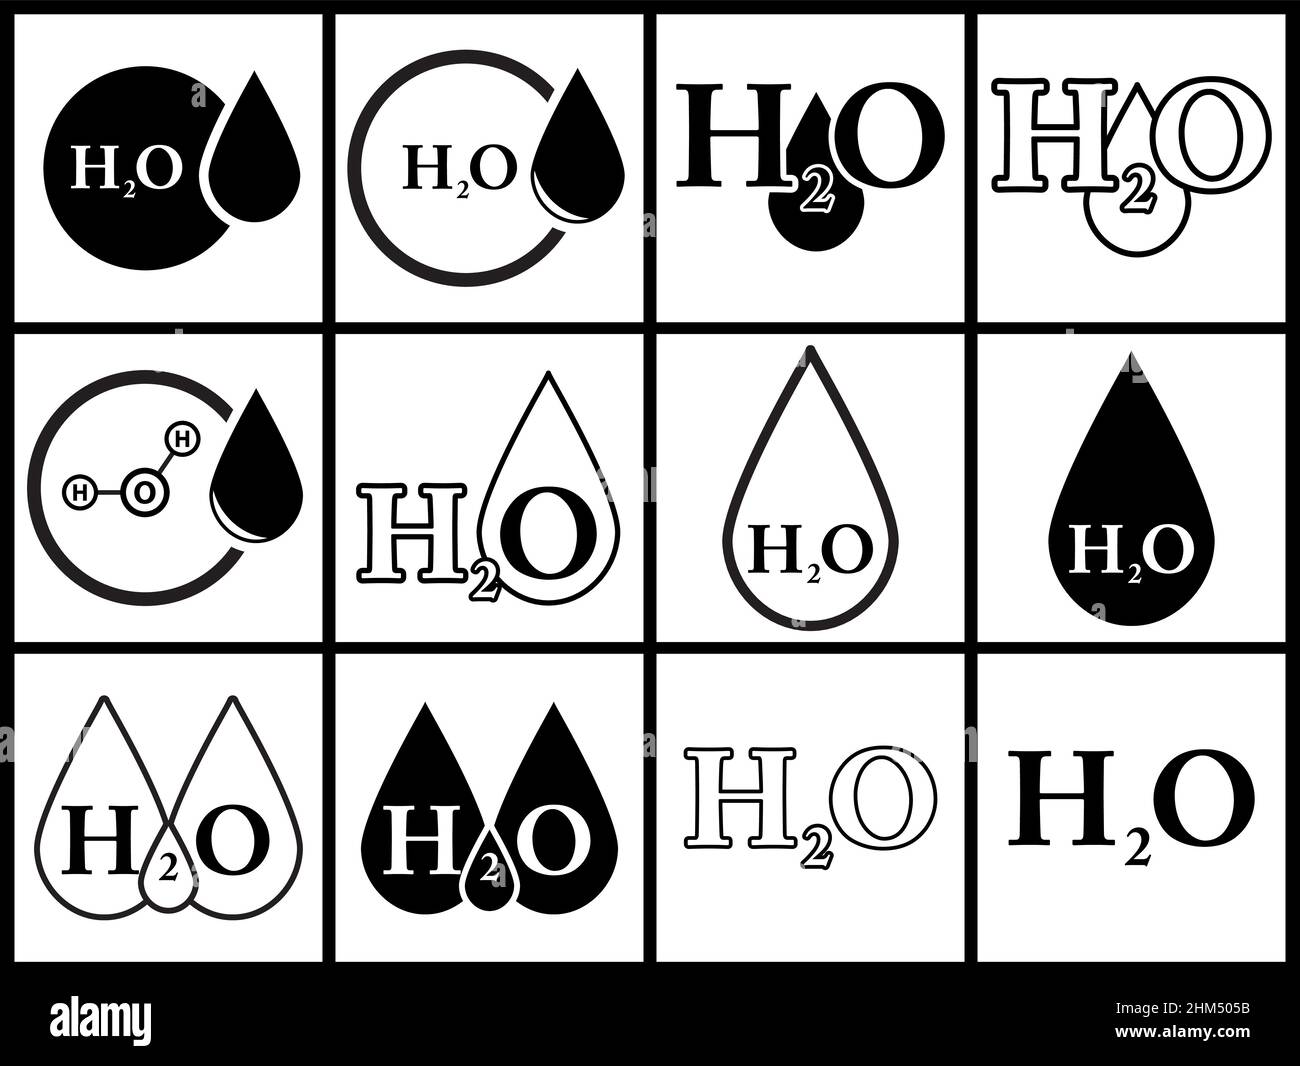 H2o icon. H2o water symbol design. Simple Vector illustration set isolated on white background. Stock Vector